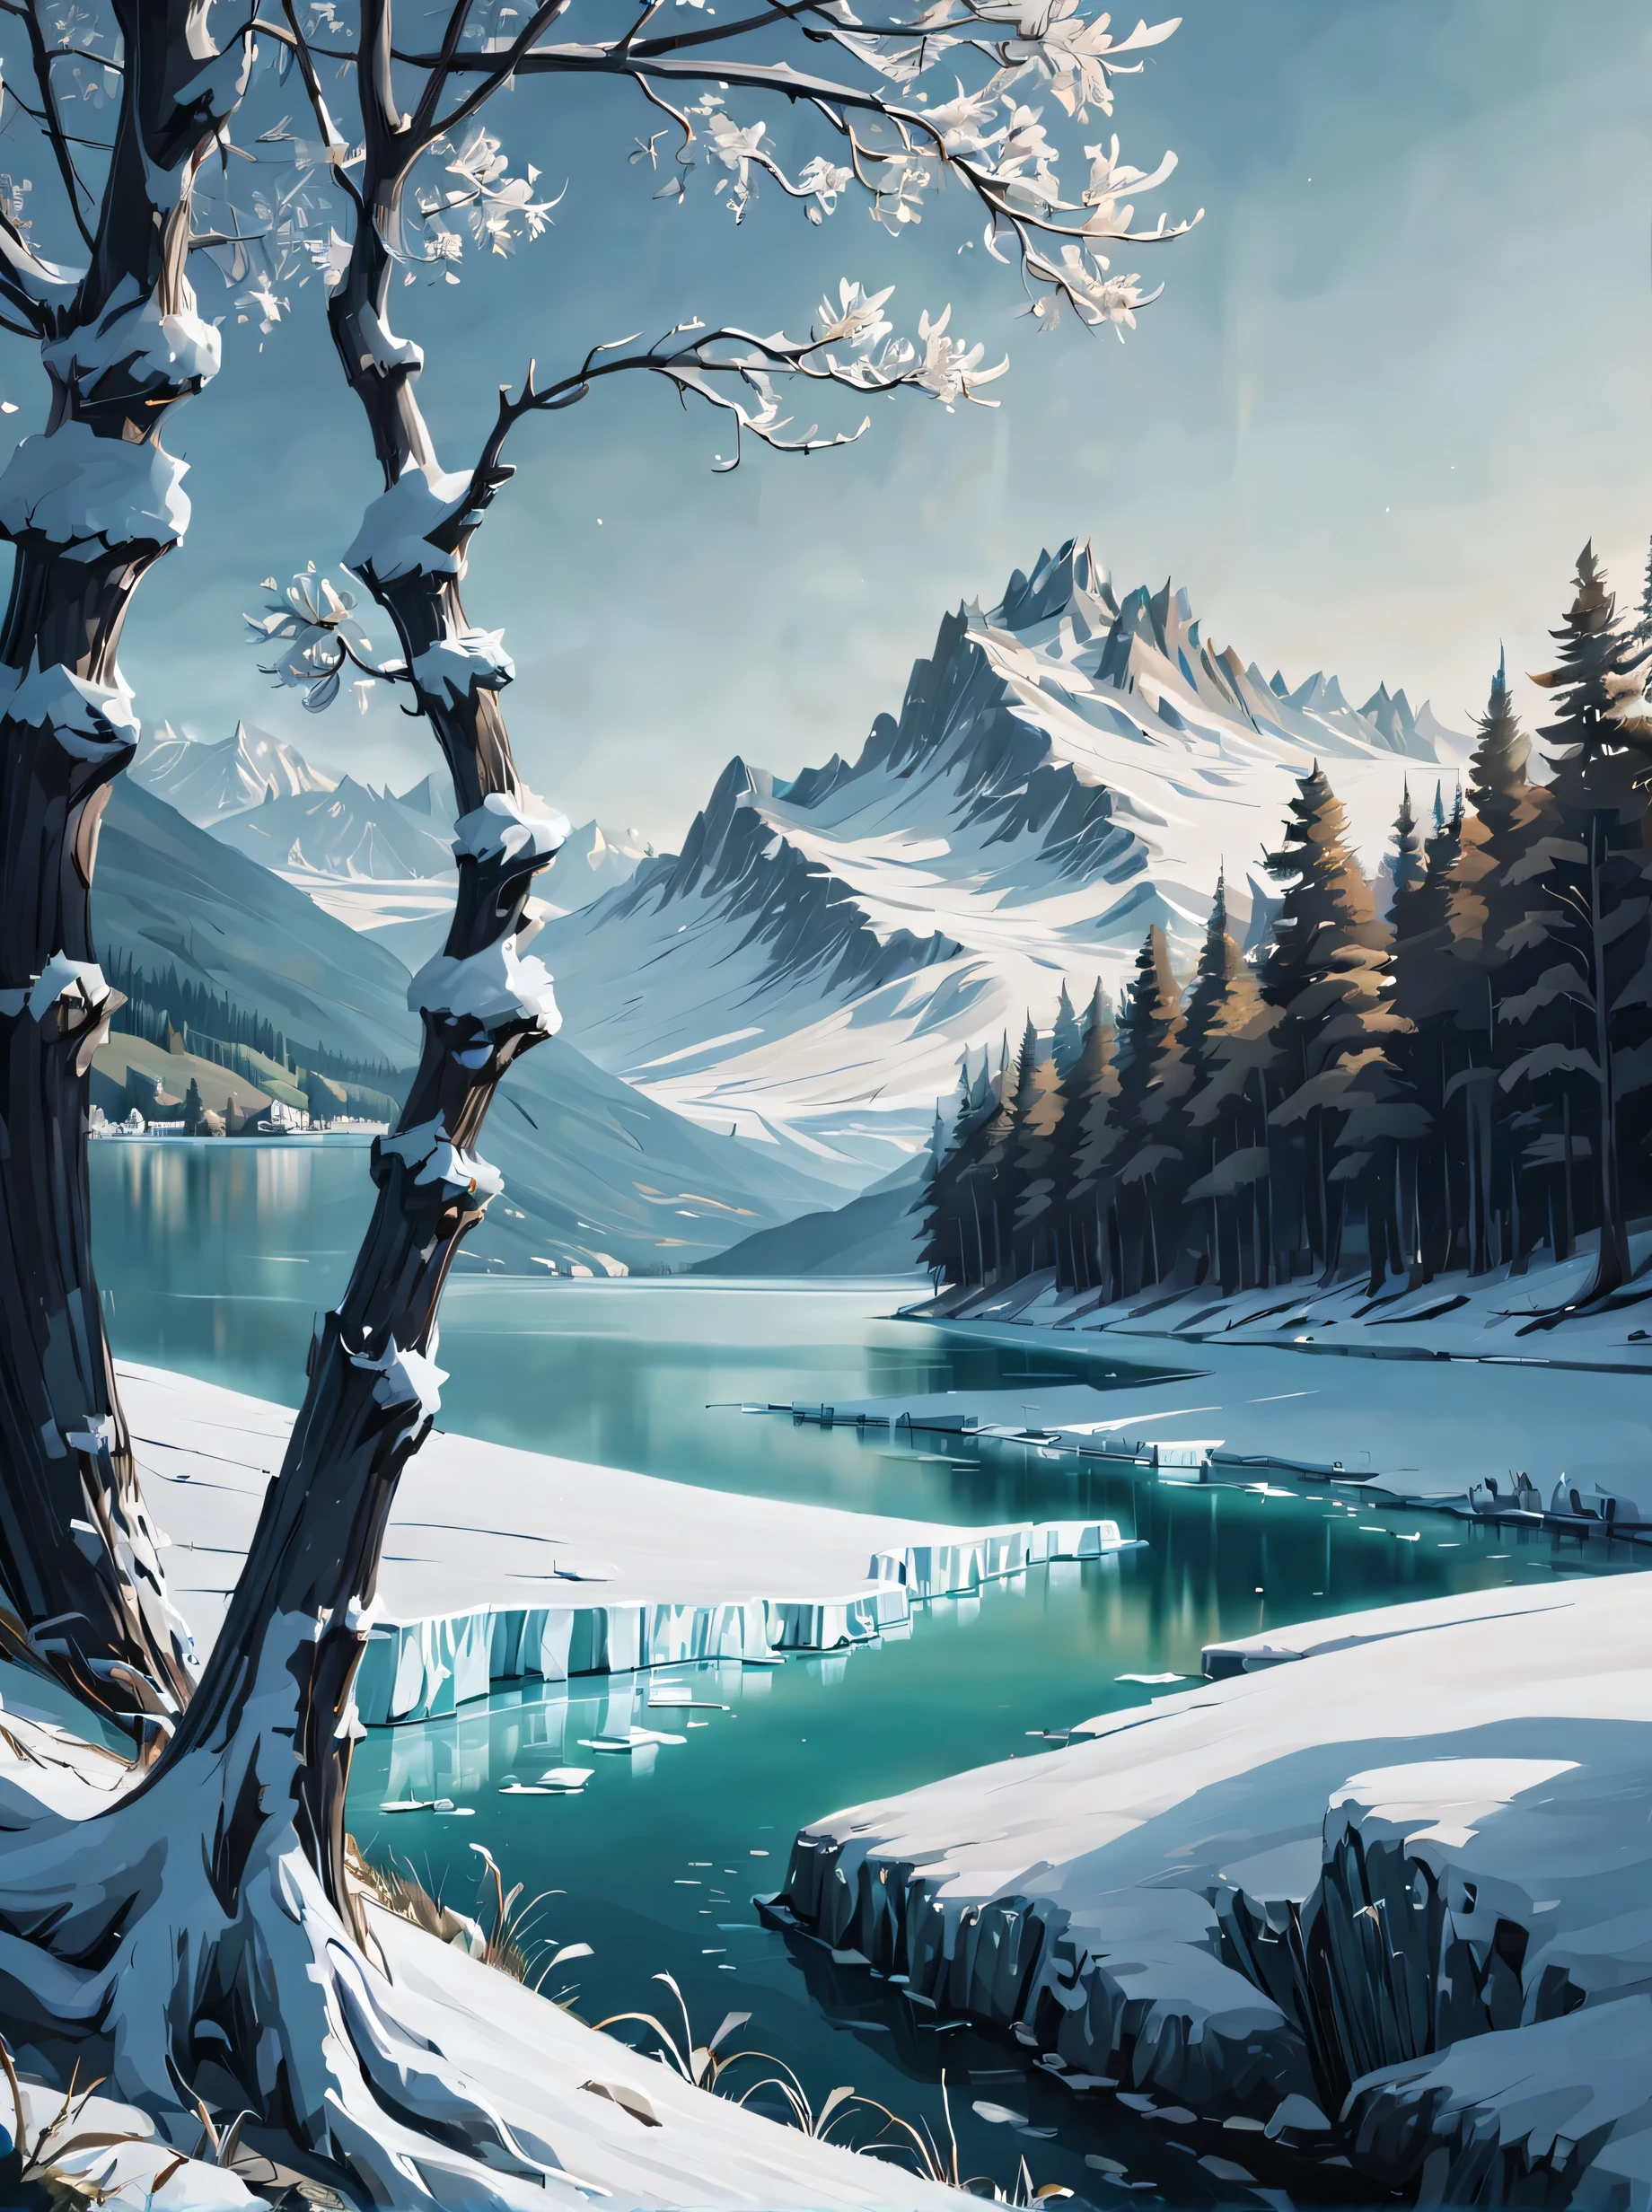 serene lago covered with a thin Geada, The delicate and intricate texture of ice and frost is depicted in the painting, the Realistic lighting effects fill the entire scene with a sense of vitality, the creative composition and perspective add profundidade and Camadas to the picture. The montanhas and trees in the background are faintly visible, criando uma atmosfera misteriosa e tranquila que traz um impacto visual. 

Lago verde, Geada, agua esverdeada, textura delicada, Geada intrincada, Realistic lighting effects, creative composition, profundidade, Camadas, montanhas, trees, Atmosfera misteriosa, Ambiente tranquilo.